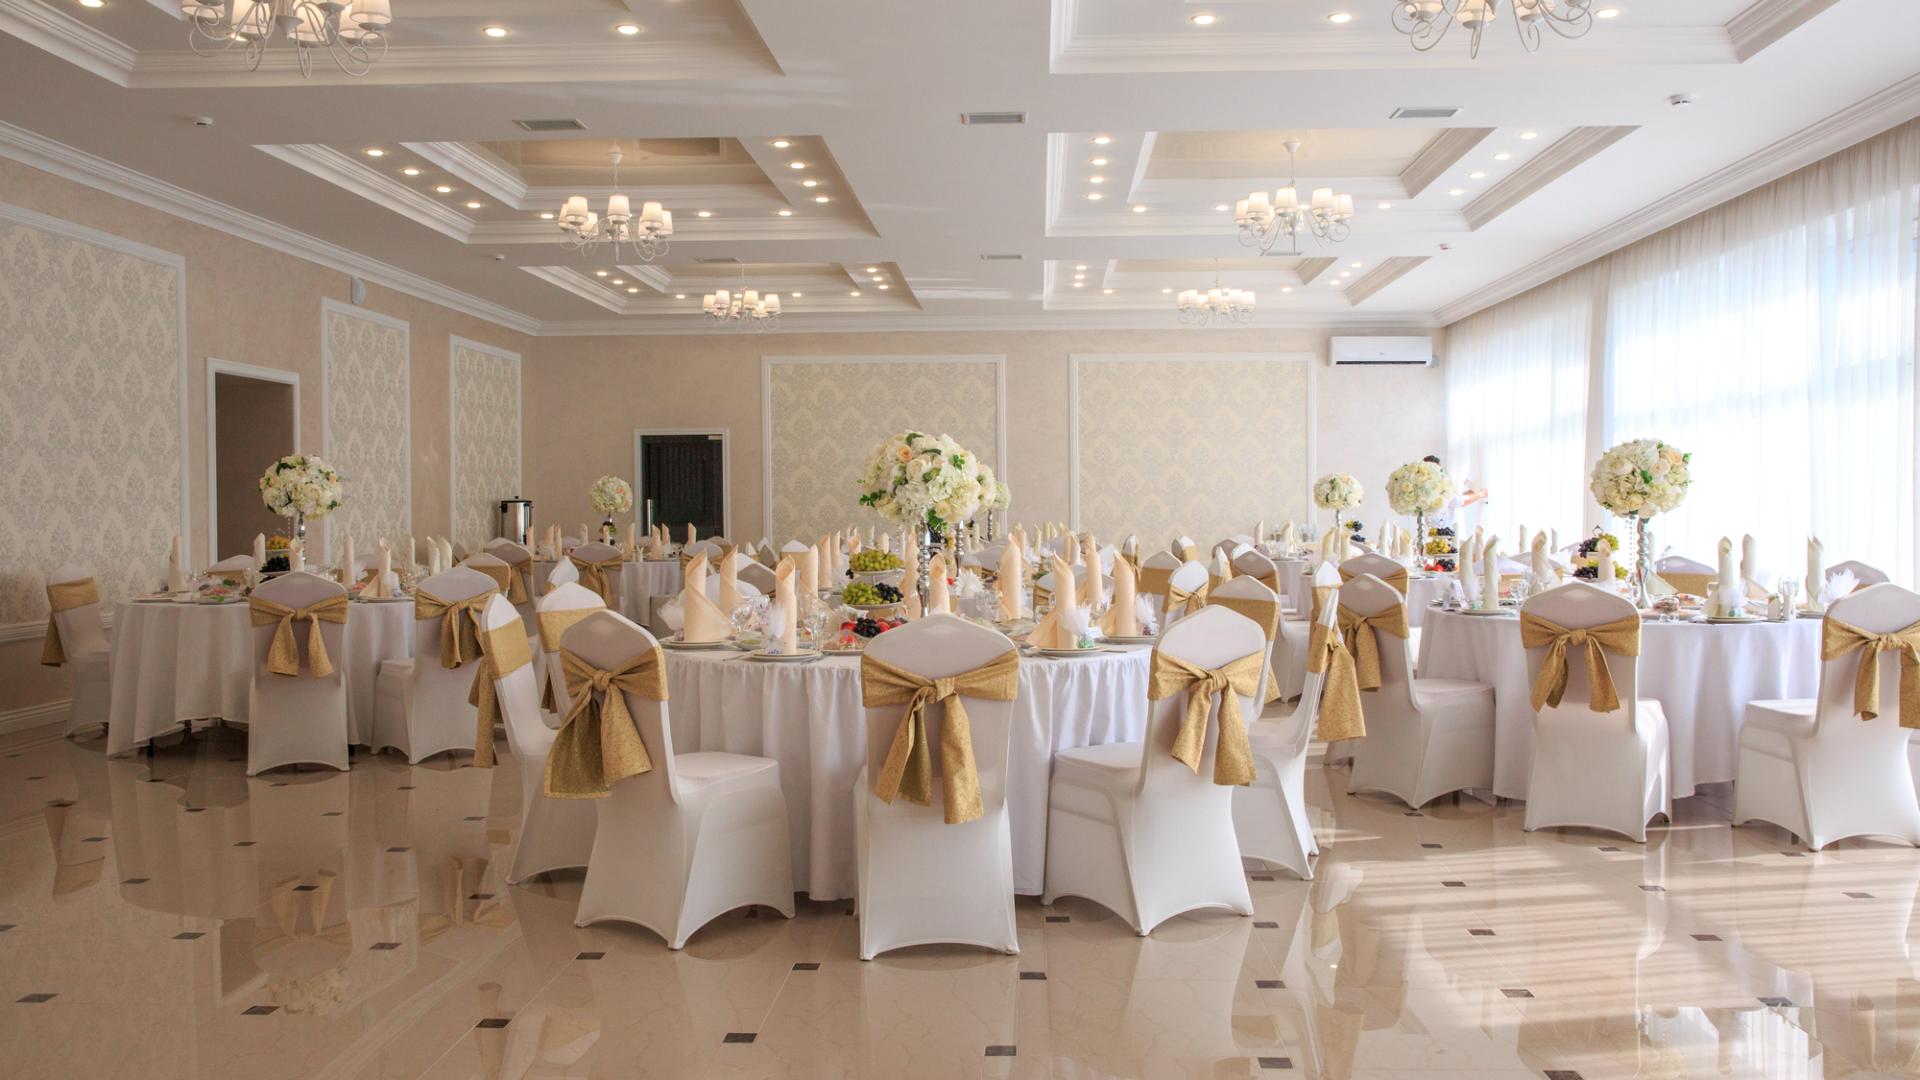 Small Banquet Halls for Rent in Houston, TX